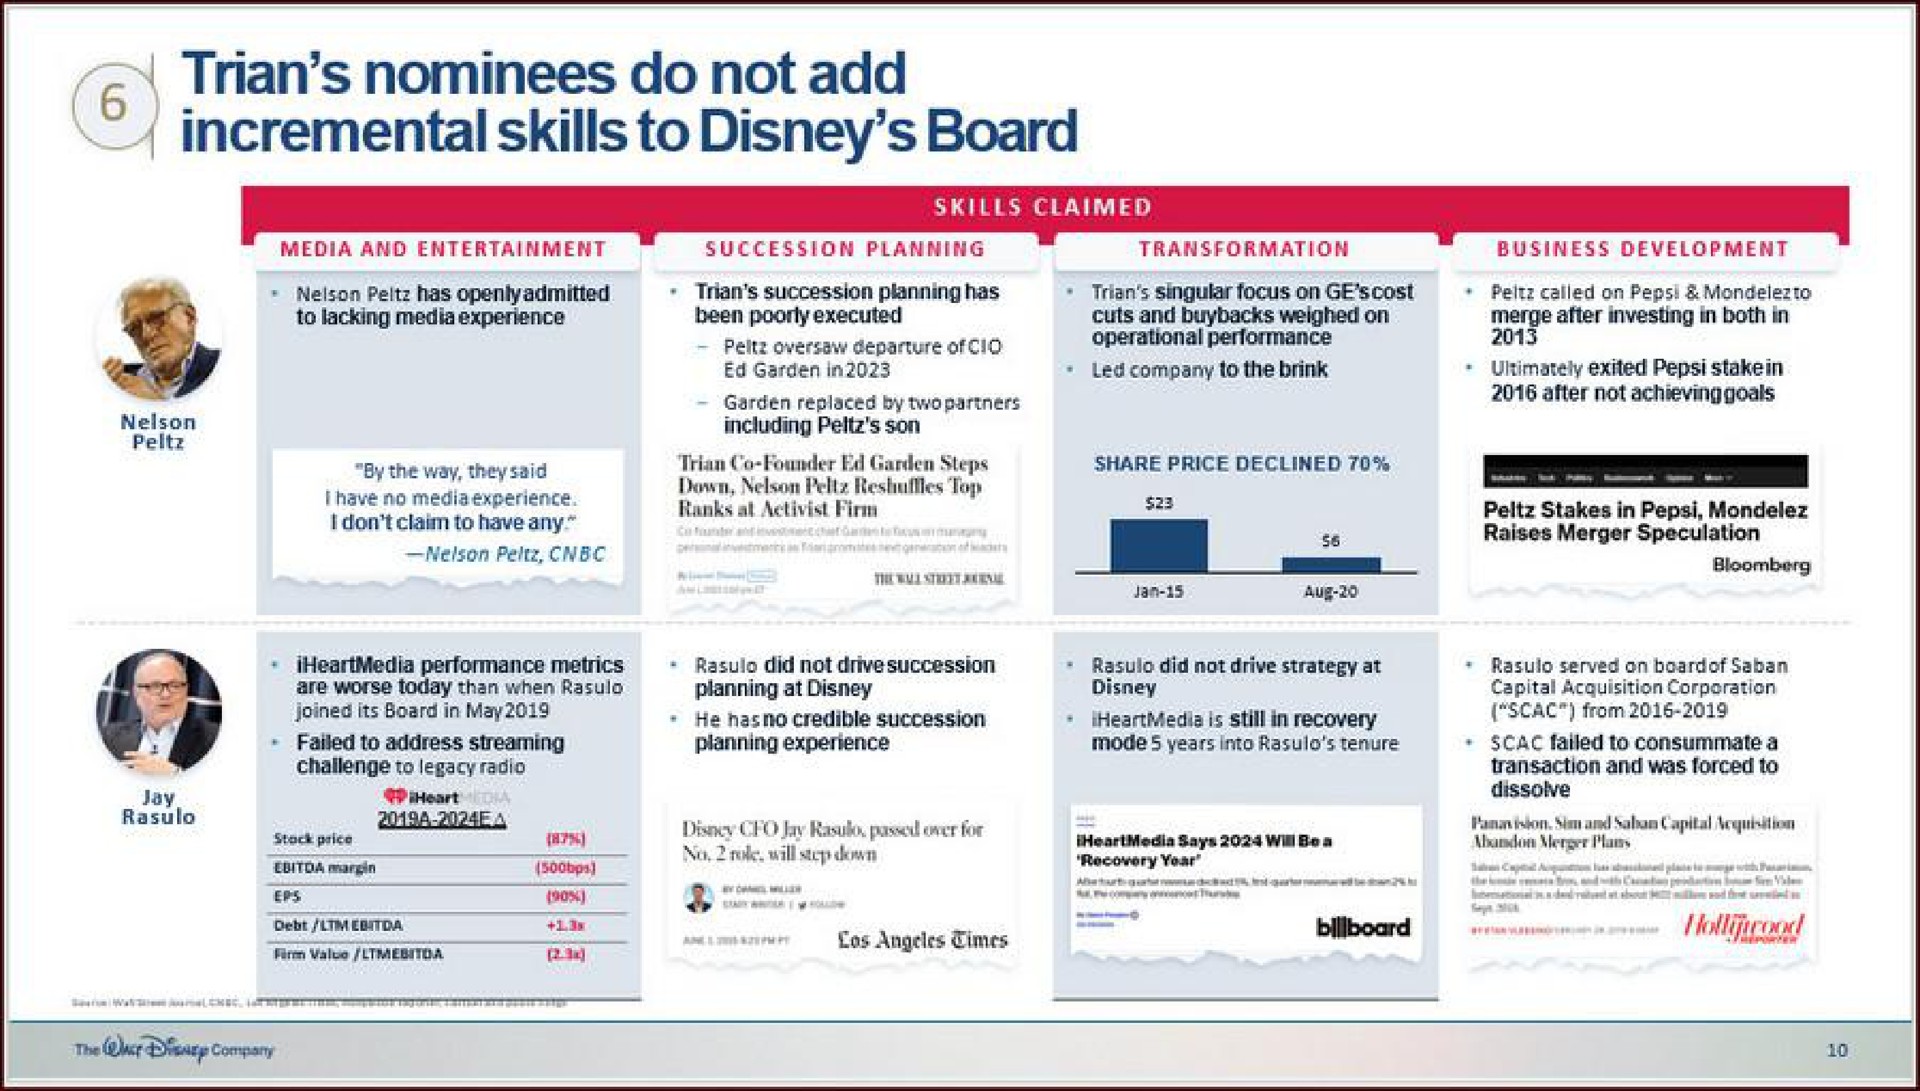 nominees do not add incremental skills to board | Disney